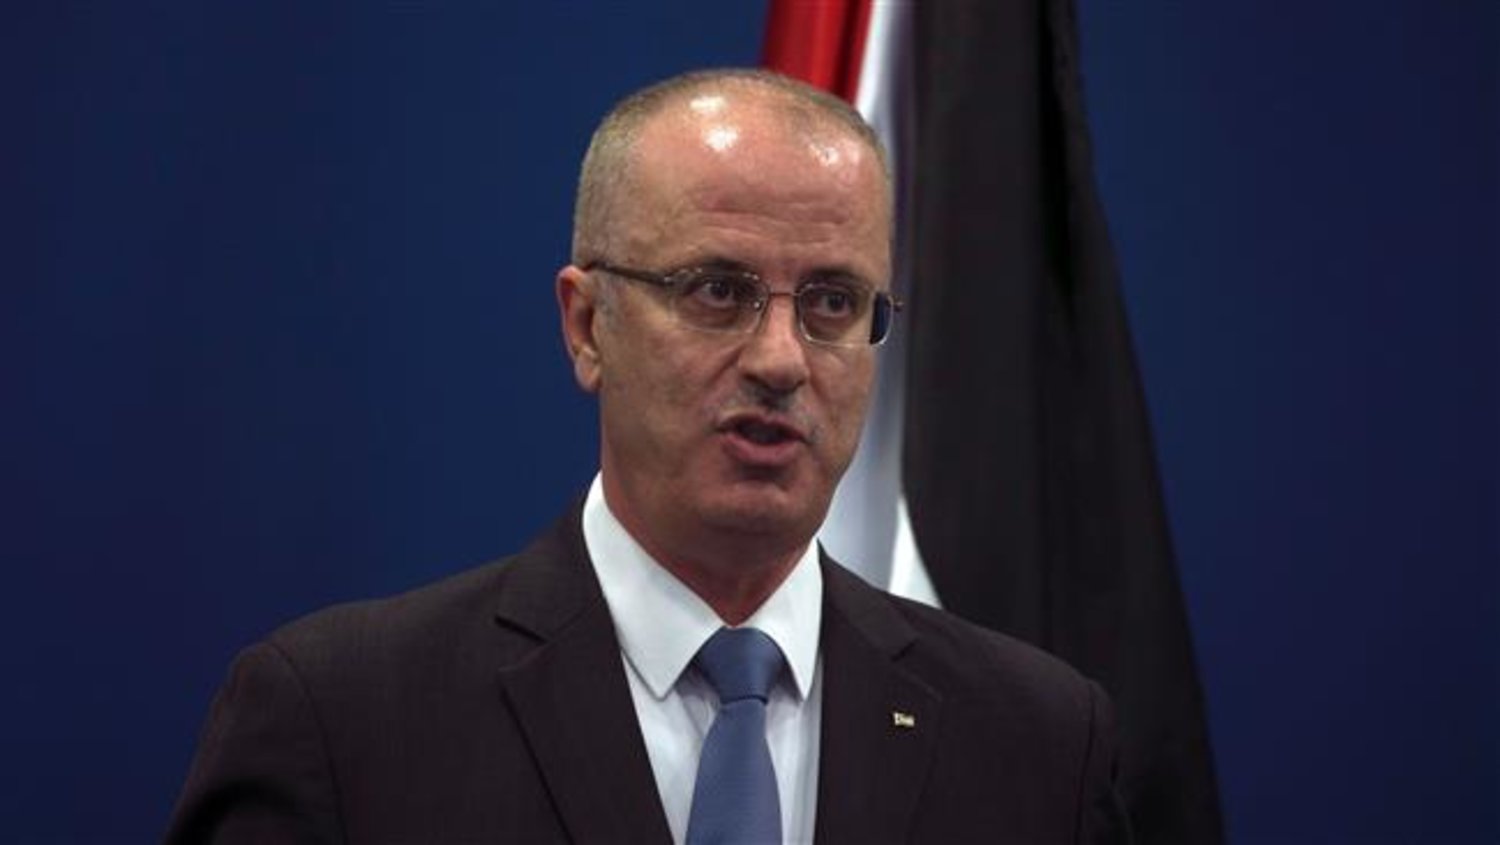 Palestinian Prime Minister Rami Hamdallah (R) speaks during a joint press conference at the Palestinian Authority headquarters in the West Bank city of Ramallah on April 25, 2017. (Photo by AFP)